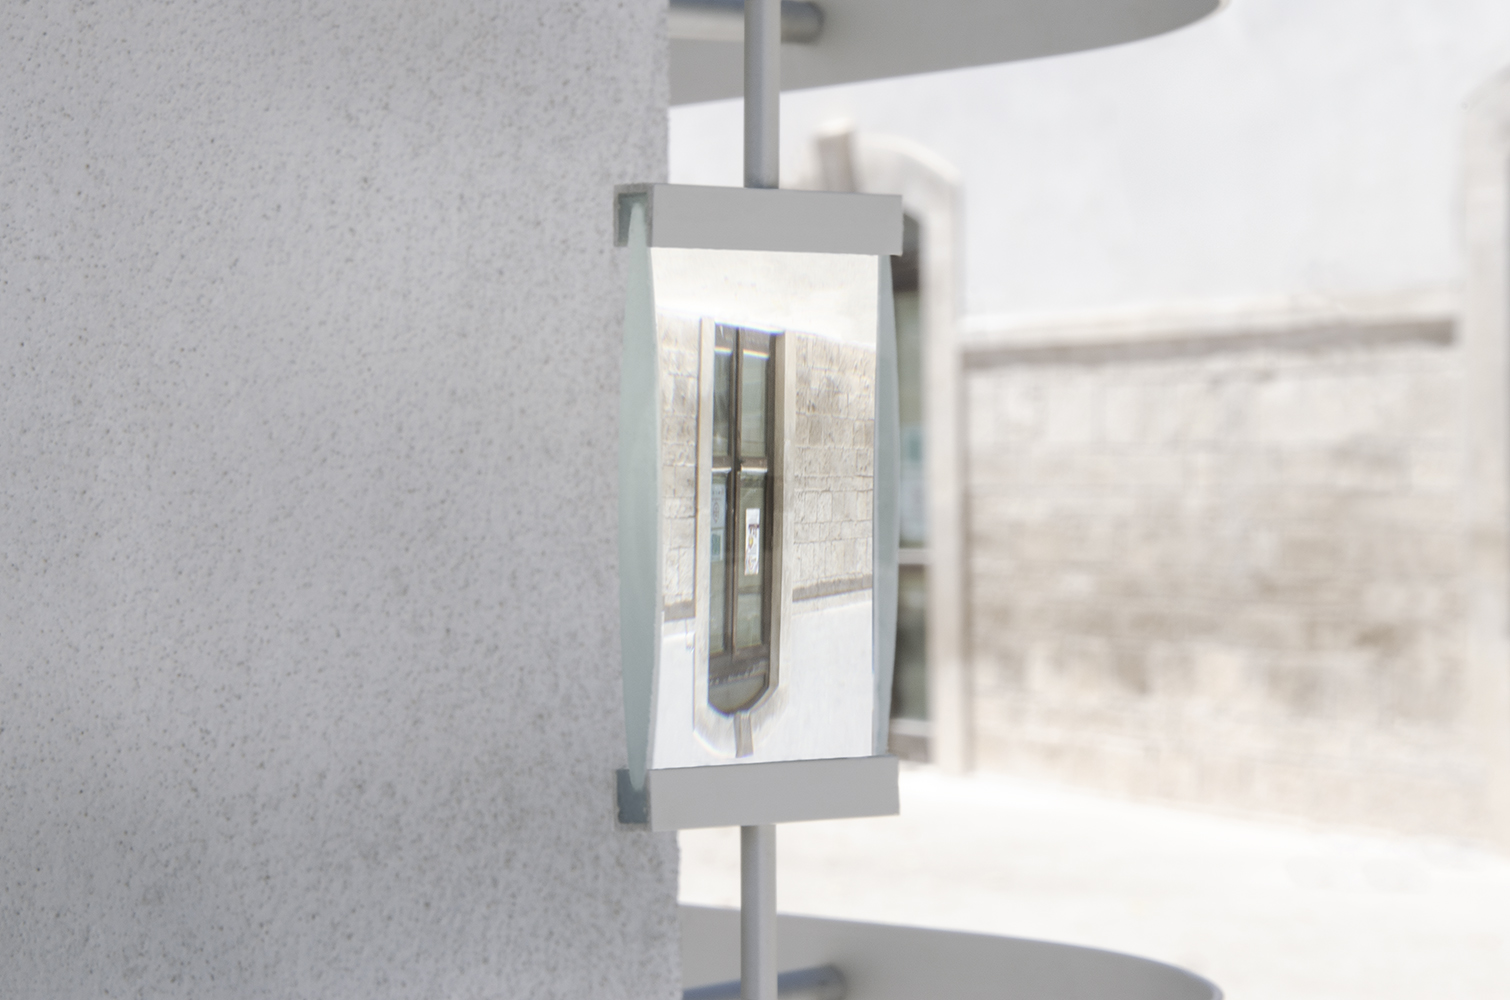 A site-specific installation with a magnifying glass that shows a flipped door